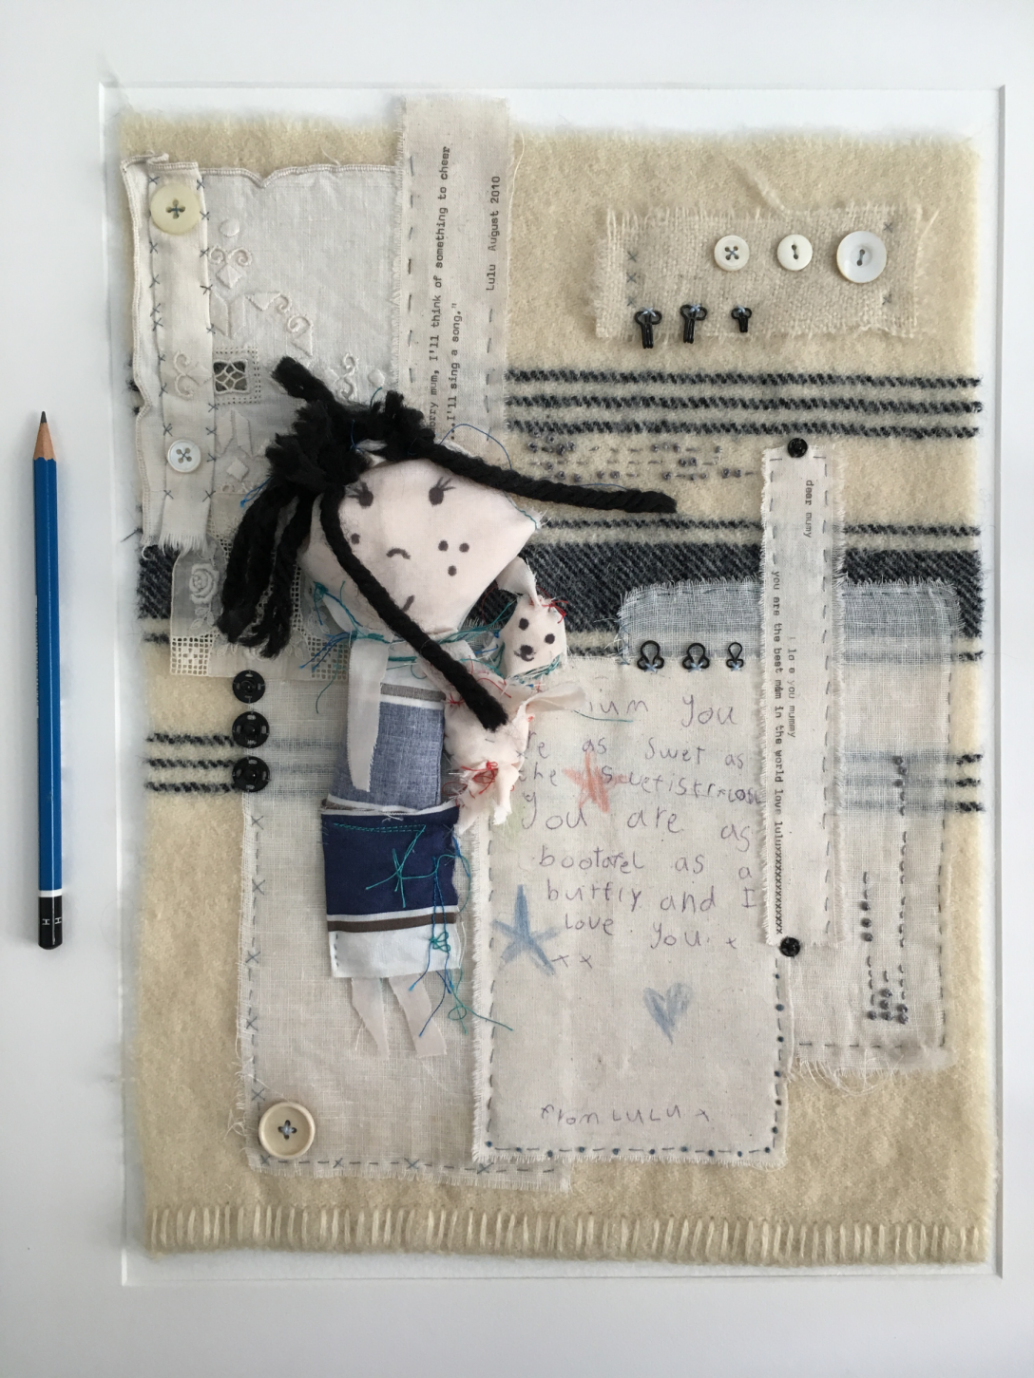 A felted creation by Morven Jones, shortlisted for the creative bursary at the School of Stitched Textiles.